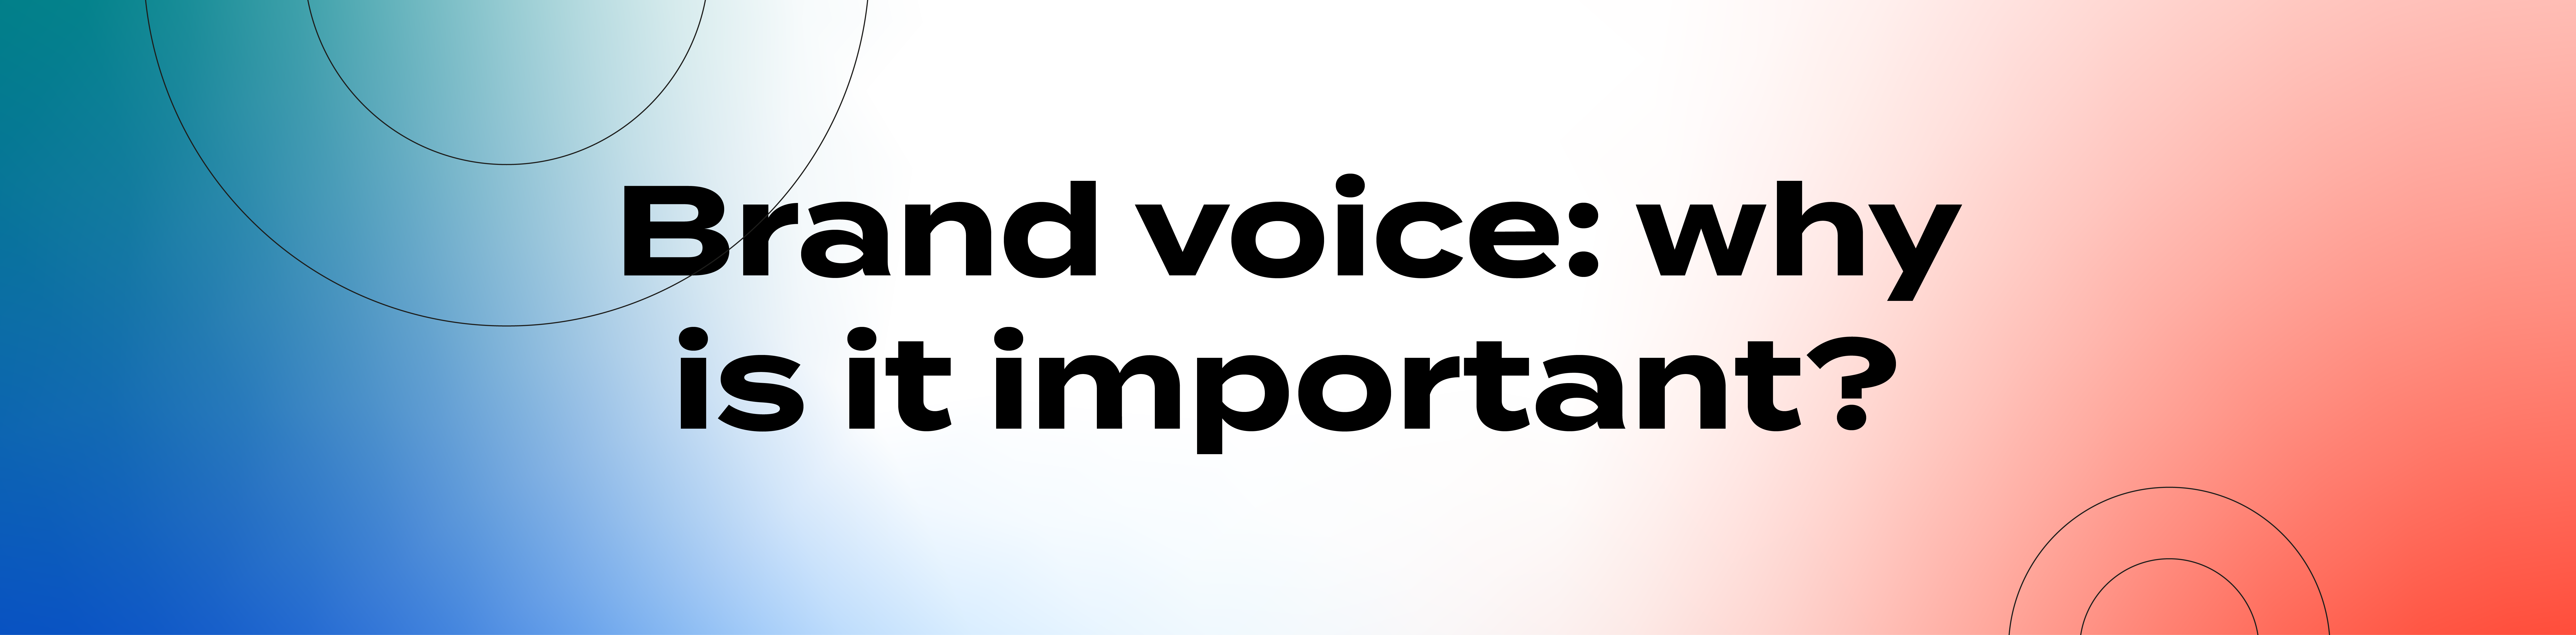 Brand voice: why is it so important?